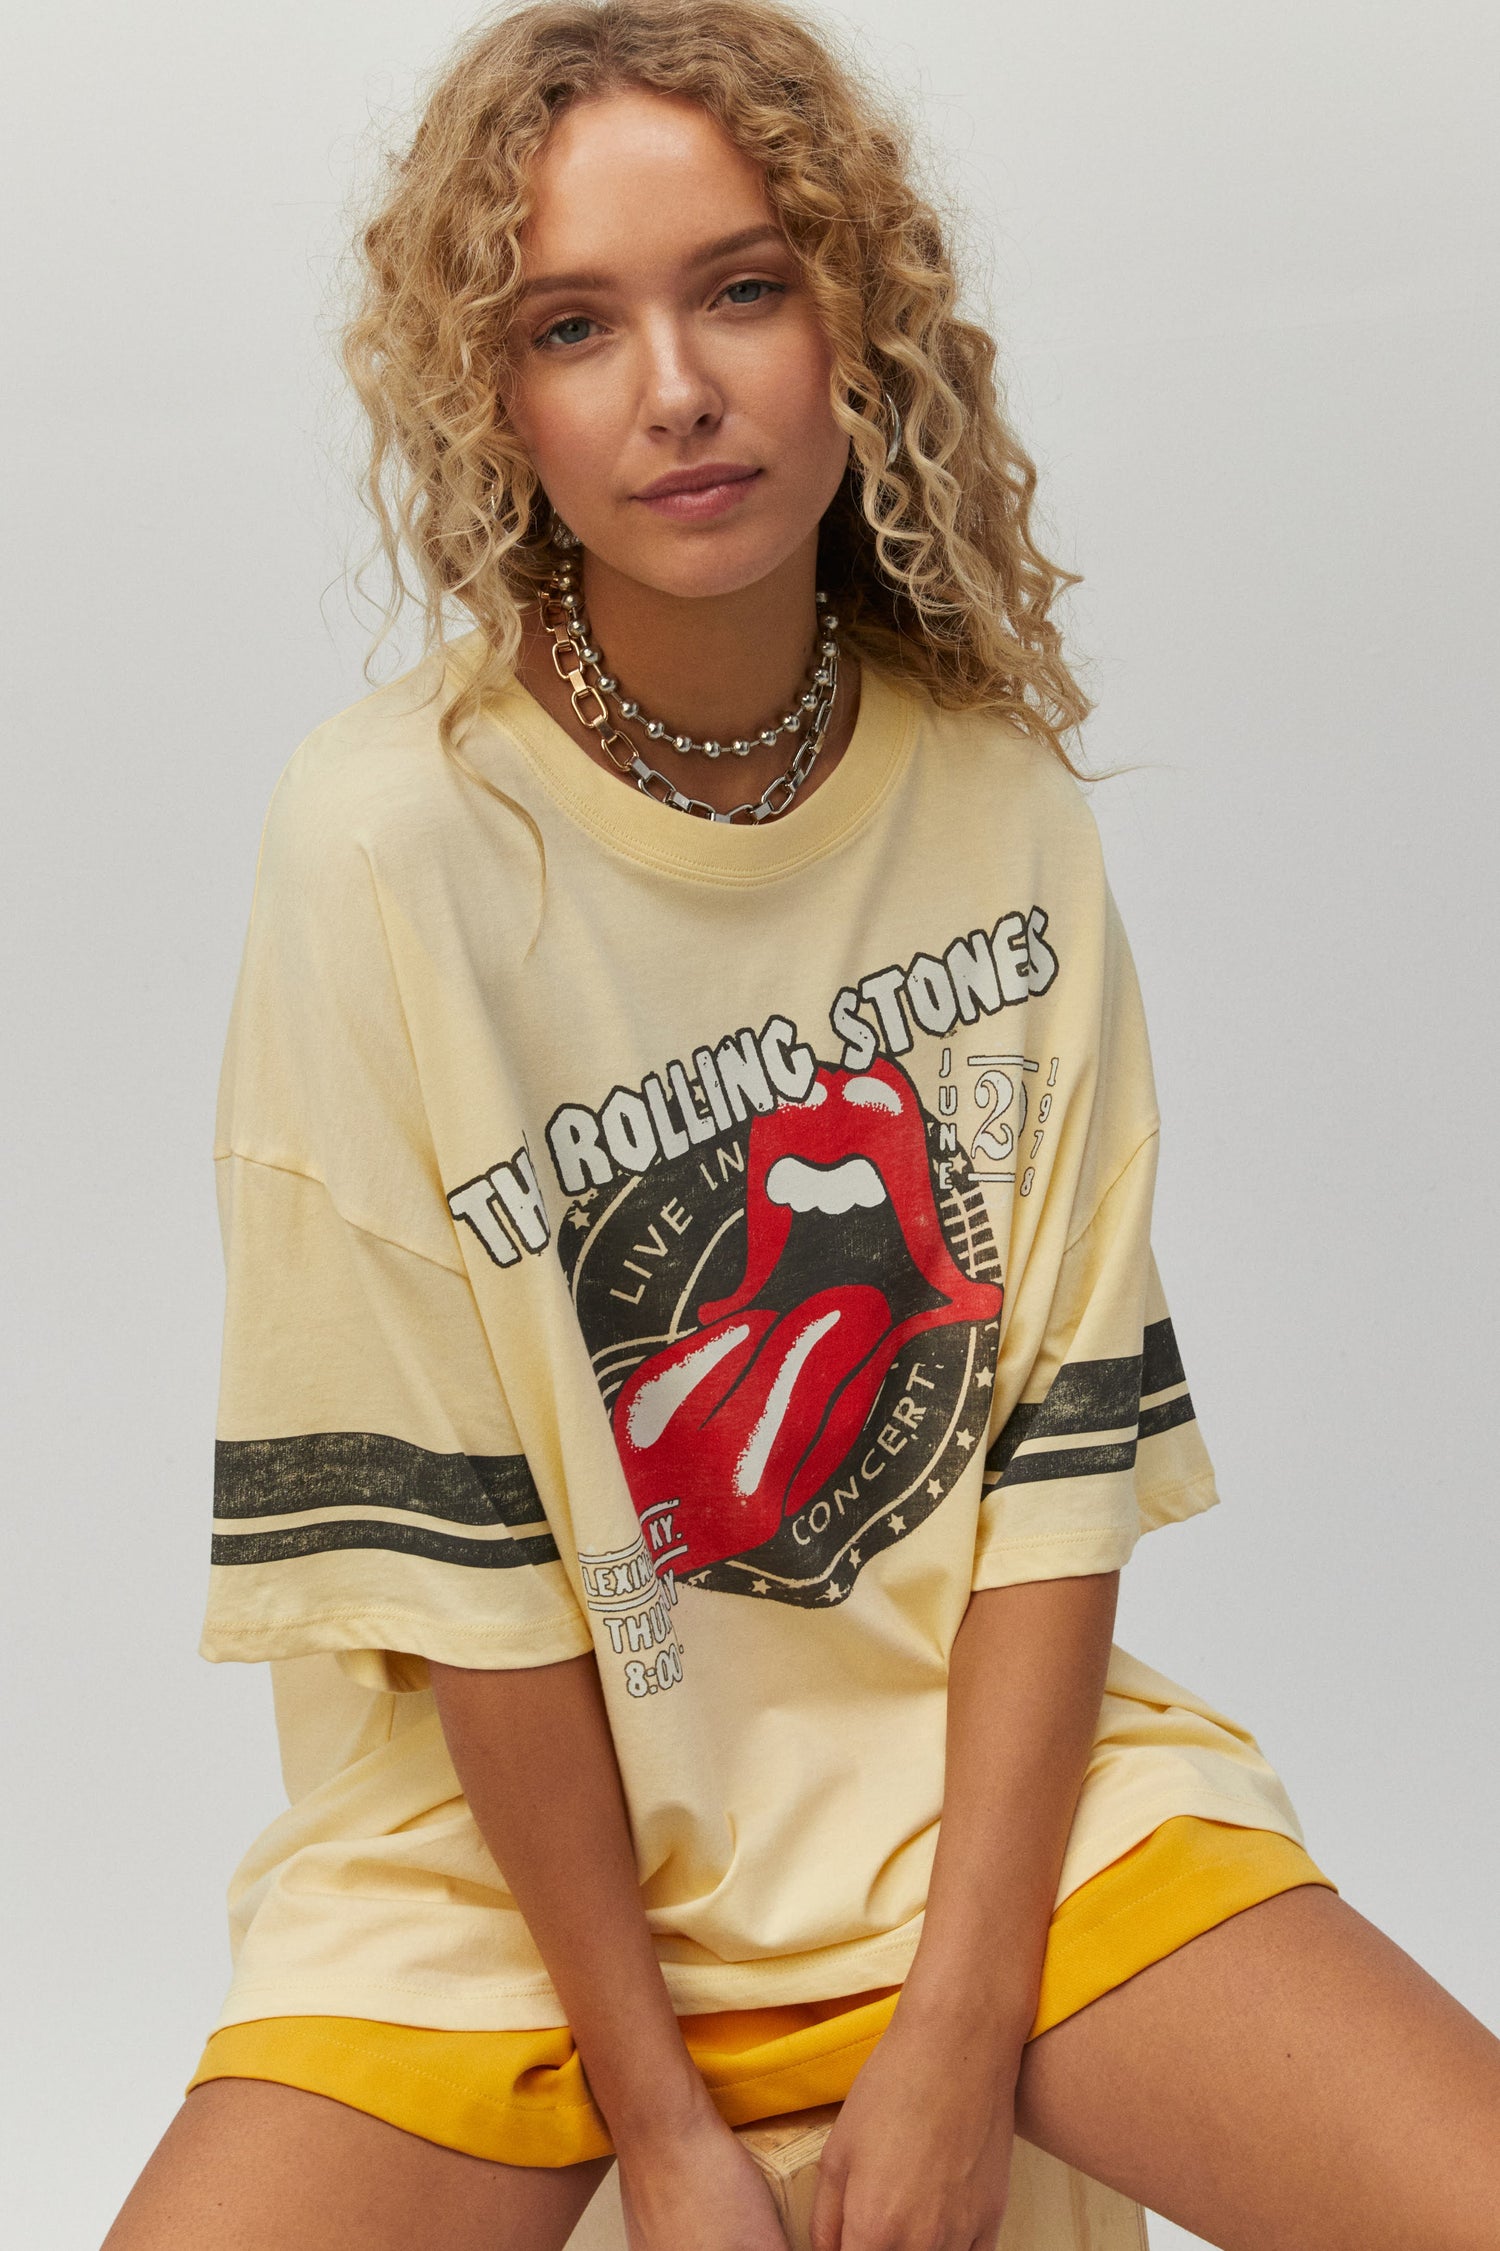 yellow tee designed with a stamp of the group’s hot lips logo